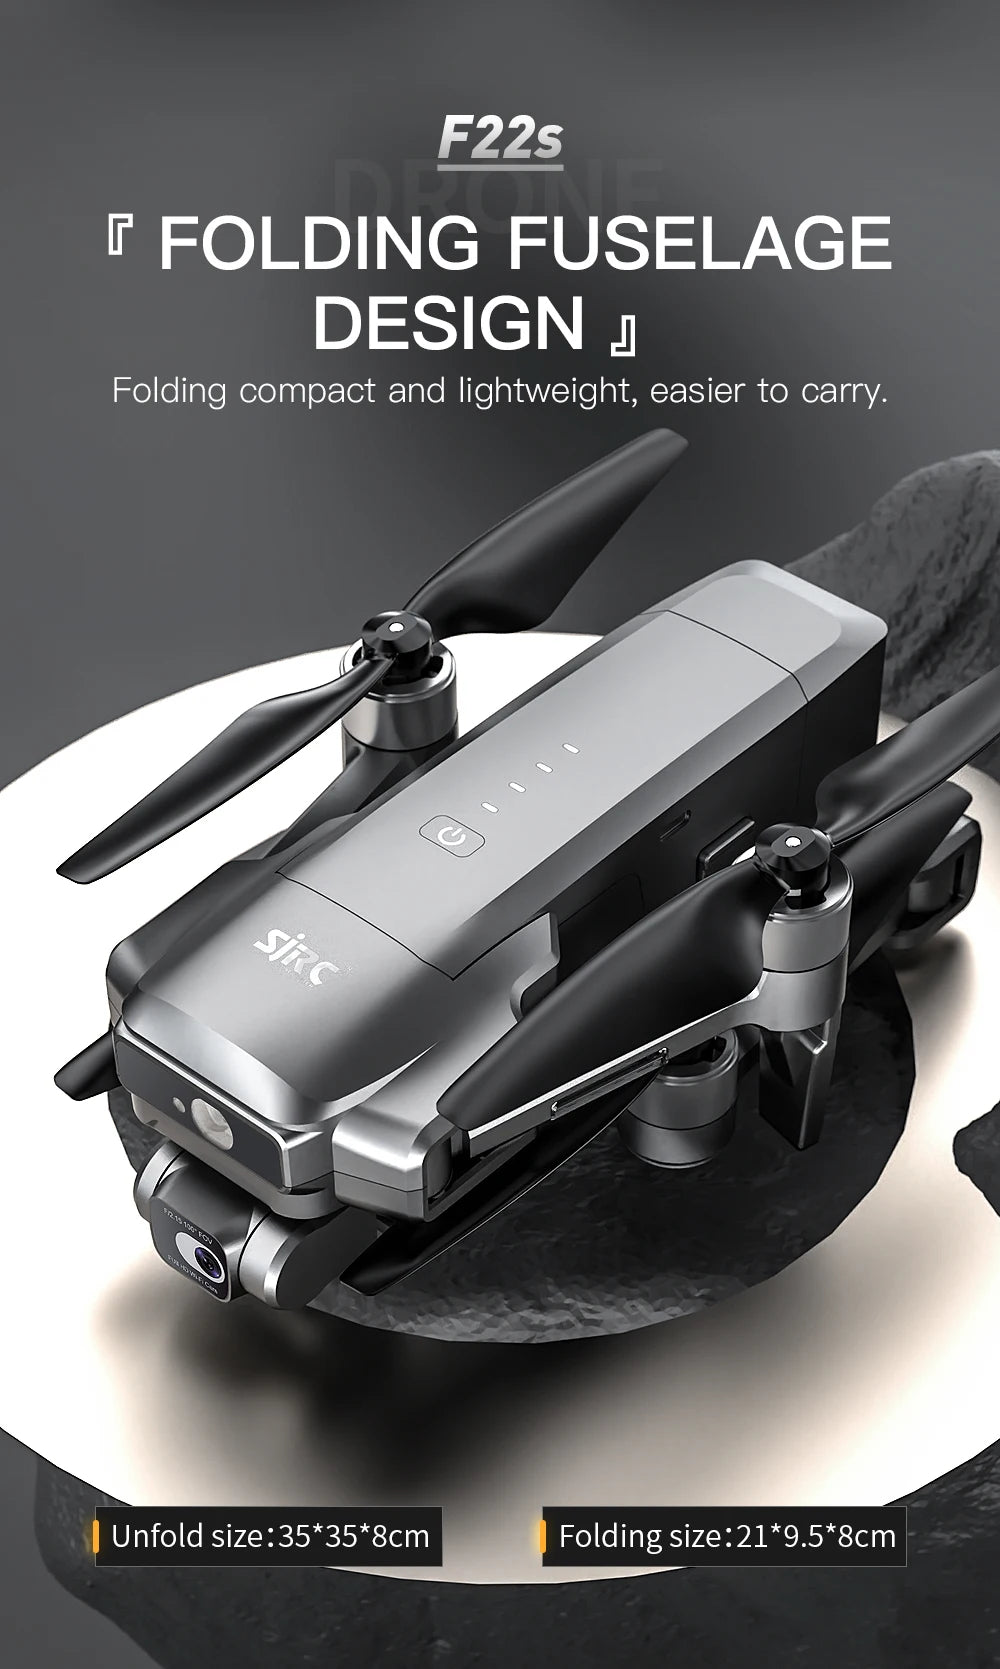 SJRC F22S Drone, Folding compact and lightweight; easier to carry . Folding size:21*9.5*